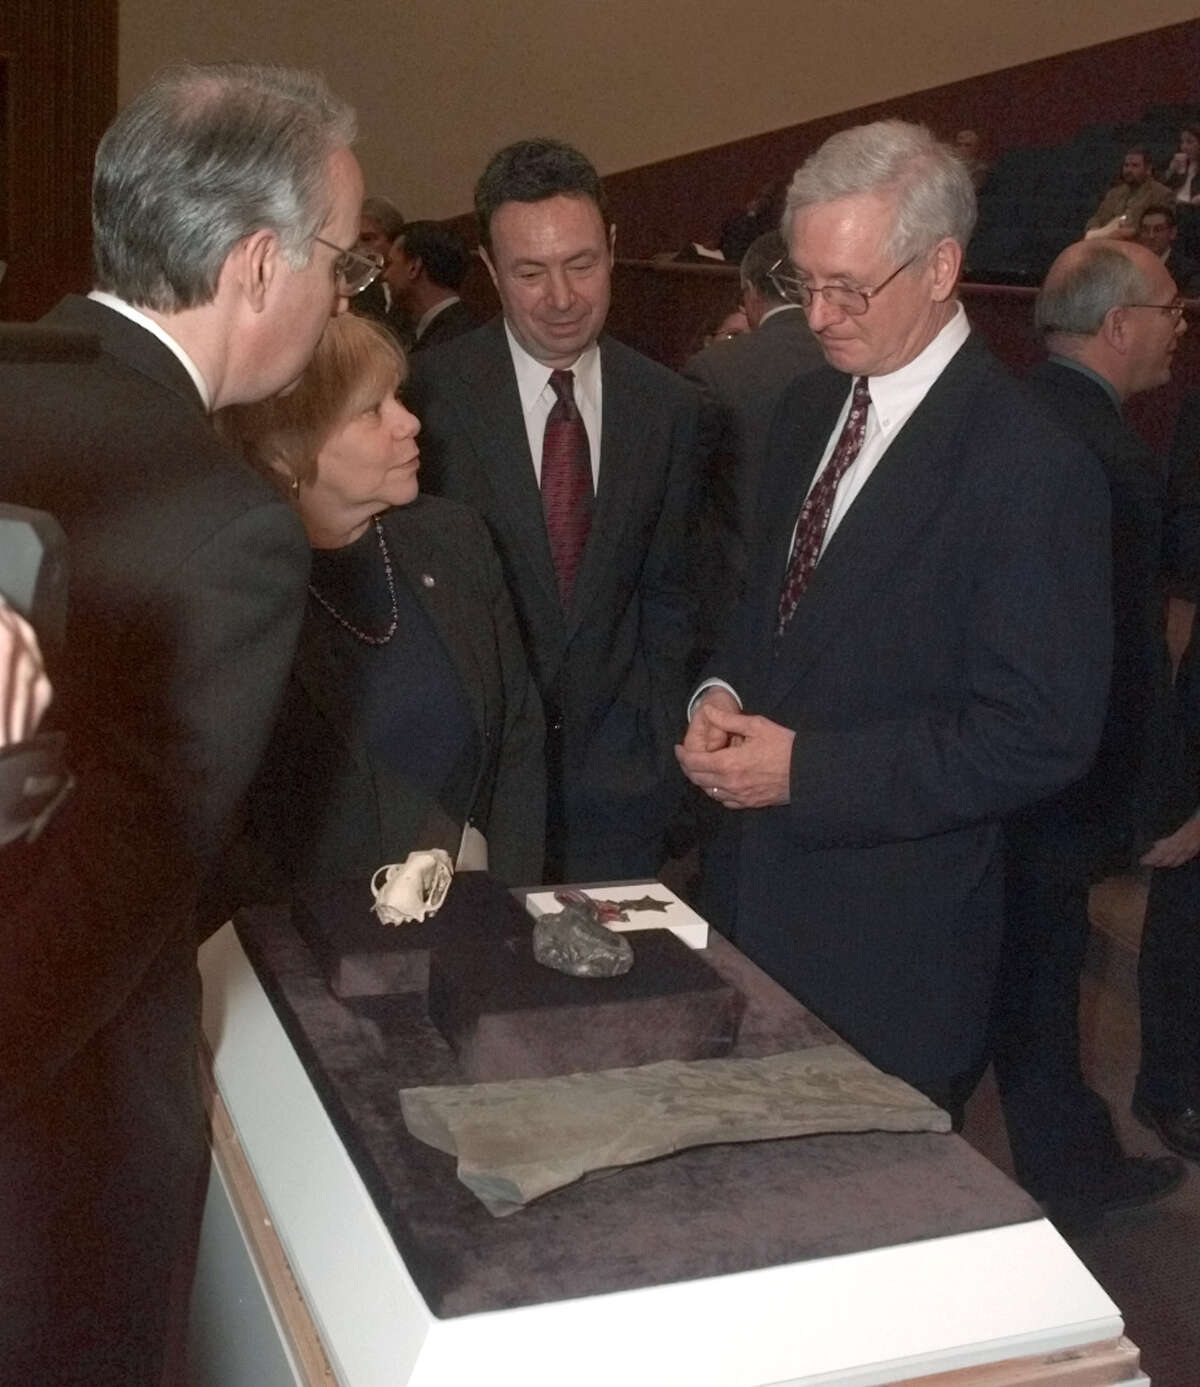 New York state Education Commissioner Richard Mills, right, shows fossils from the New York State Museum collection to legislators before a legislative hearing on the state budget Tuesday, Jan. 30, 2001 in Albany, N.Y. Assembly members are, from left: Steven Sanders, D-New York; Joan Millman, D-Brooklyn; and Ronald Canestrari, D-Albany.